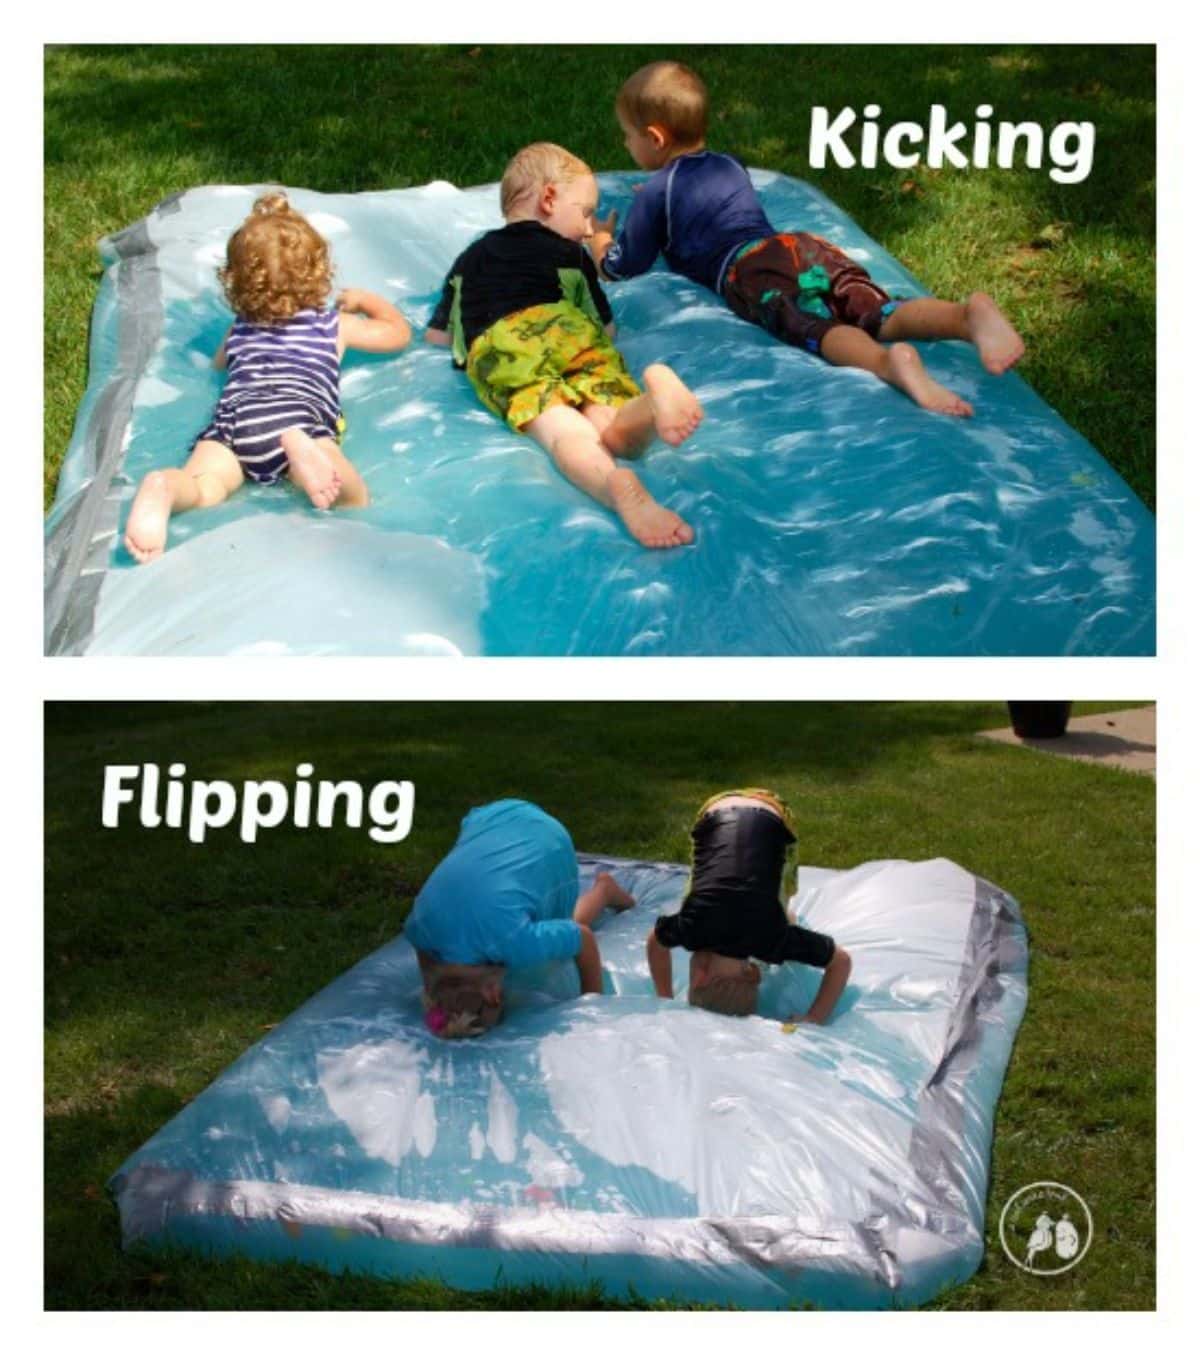 2 images of kids playing on water blobs.